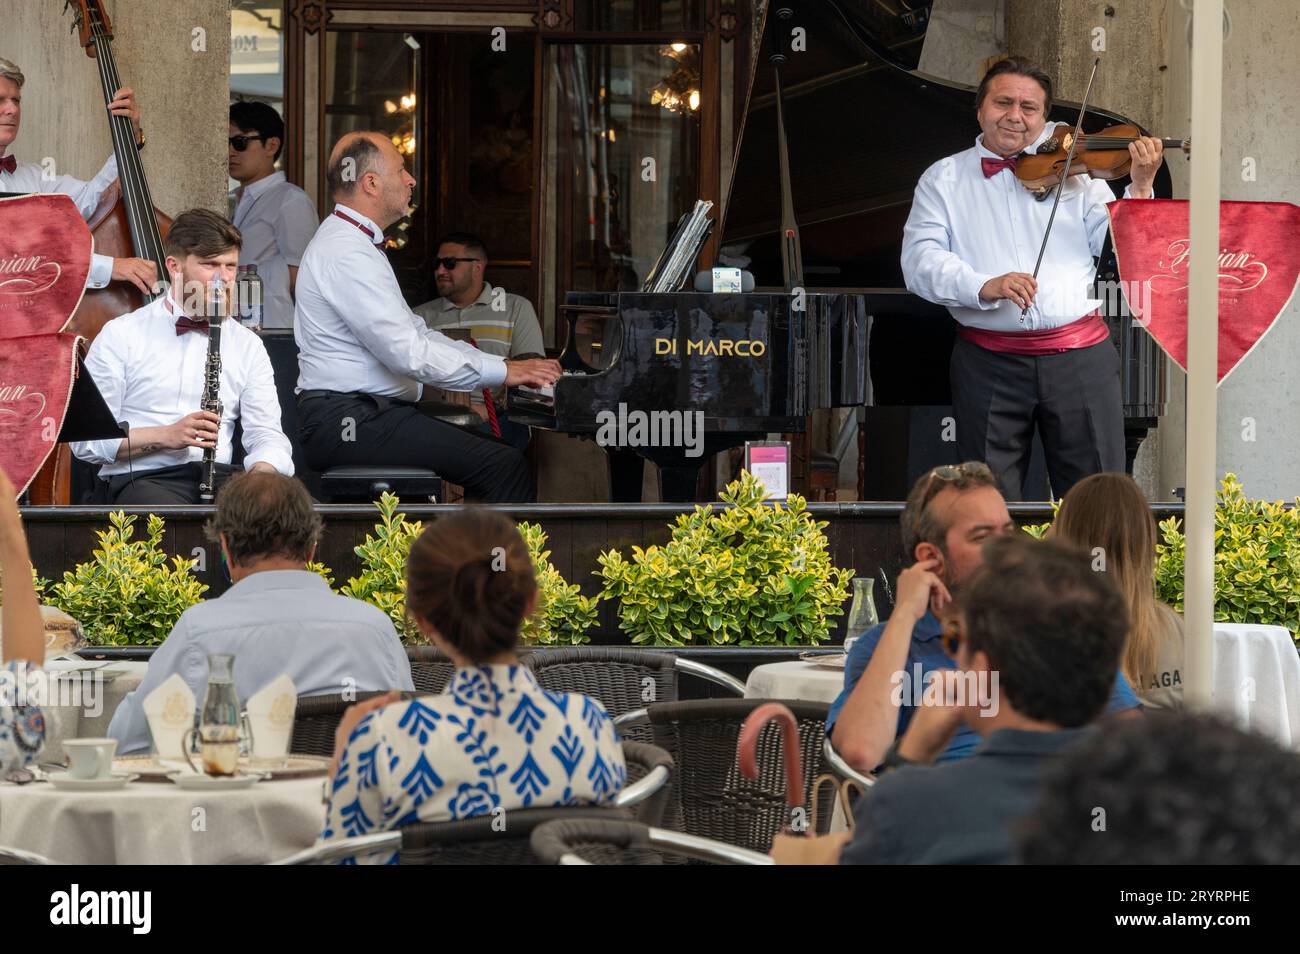 A live band performs to seated customers at Caf Florian on Piazza San Marco, (St. Marks Square) in Venice in the Venetian region of northern Italy. Stock Photo